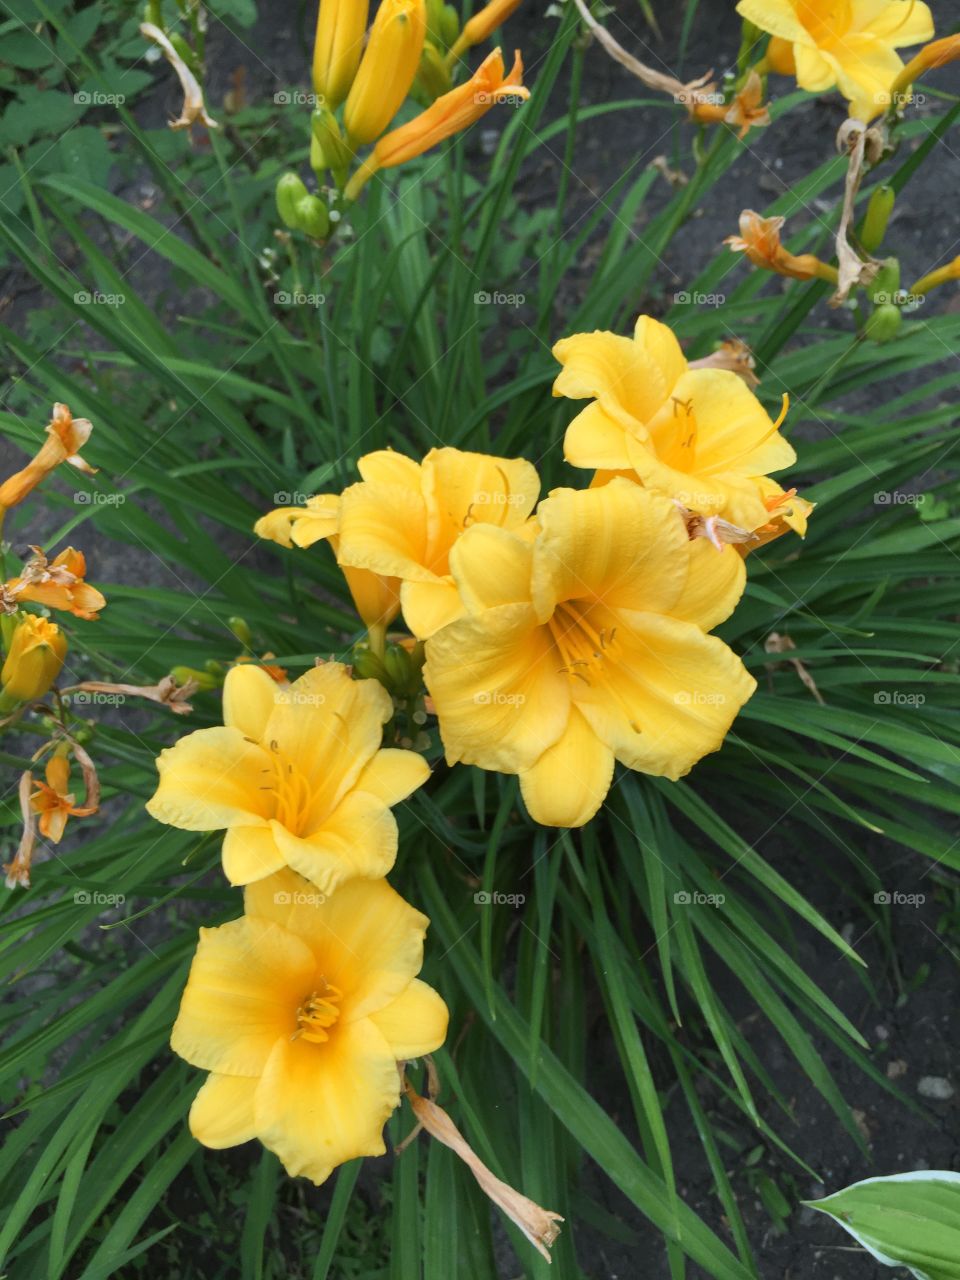 Yellow flowers. Pretty summer flowers that are vibrantly yellow